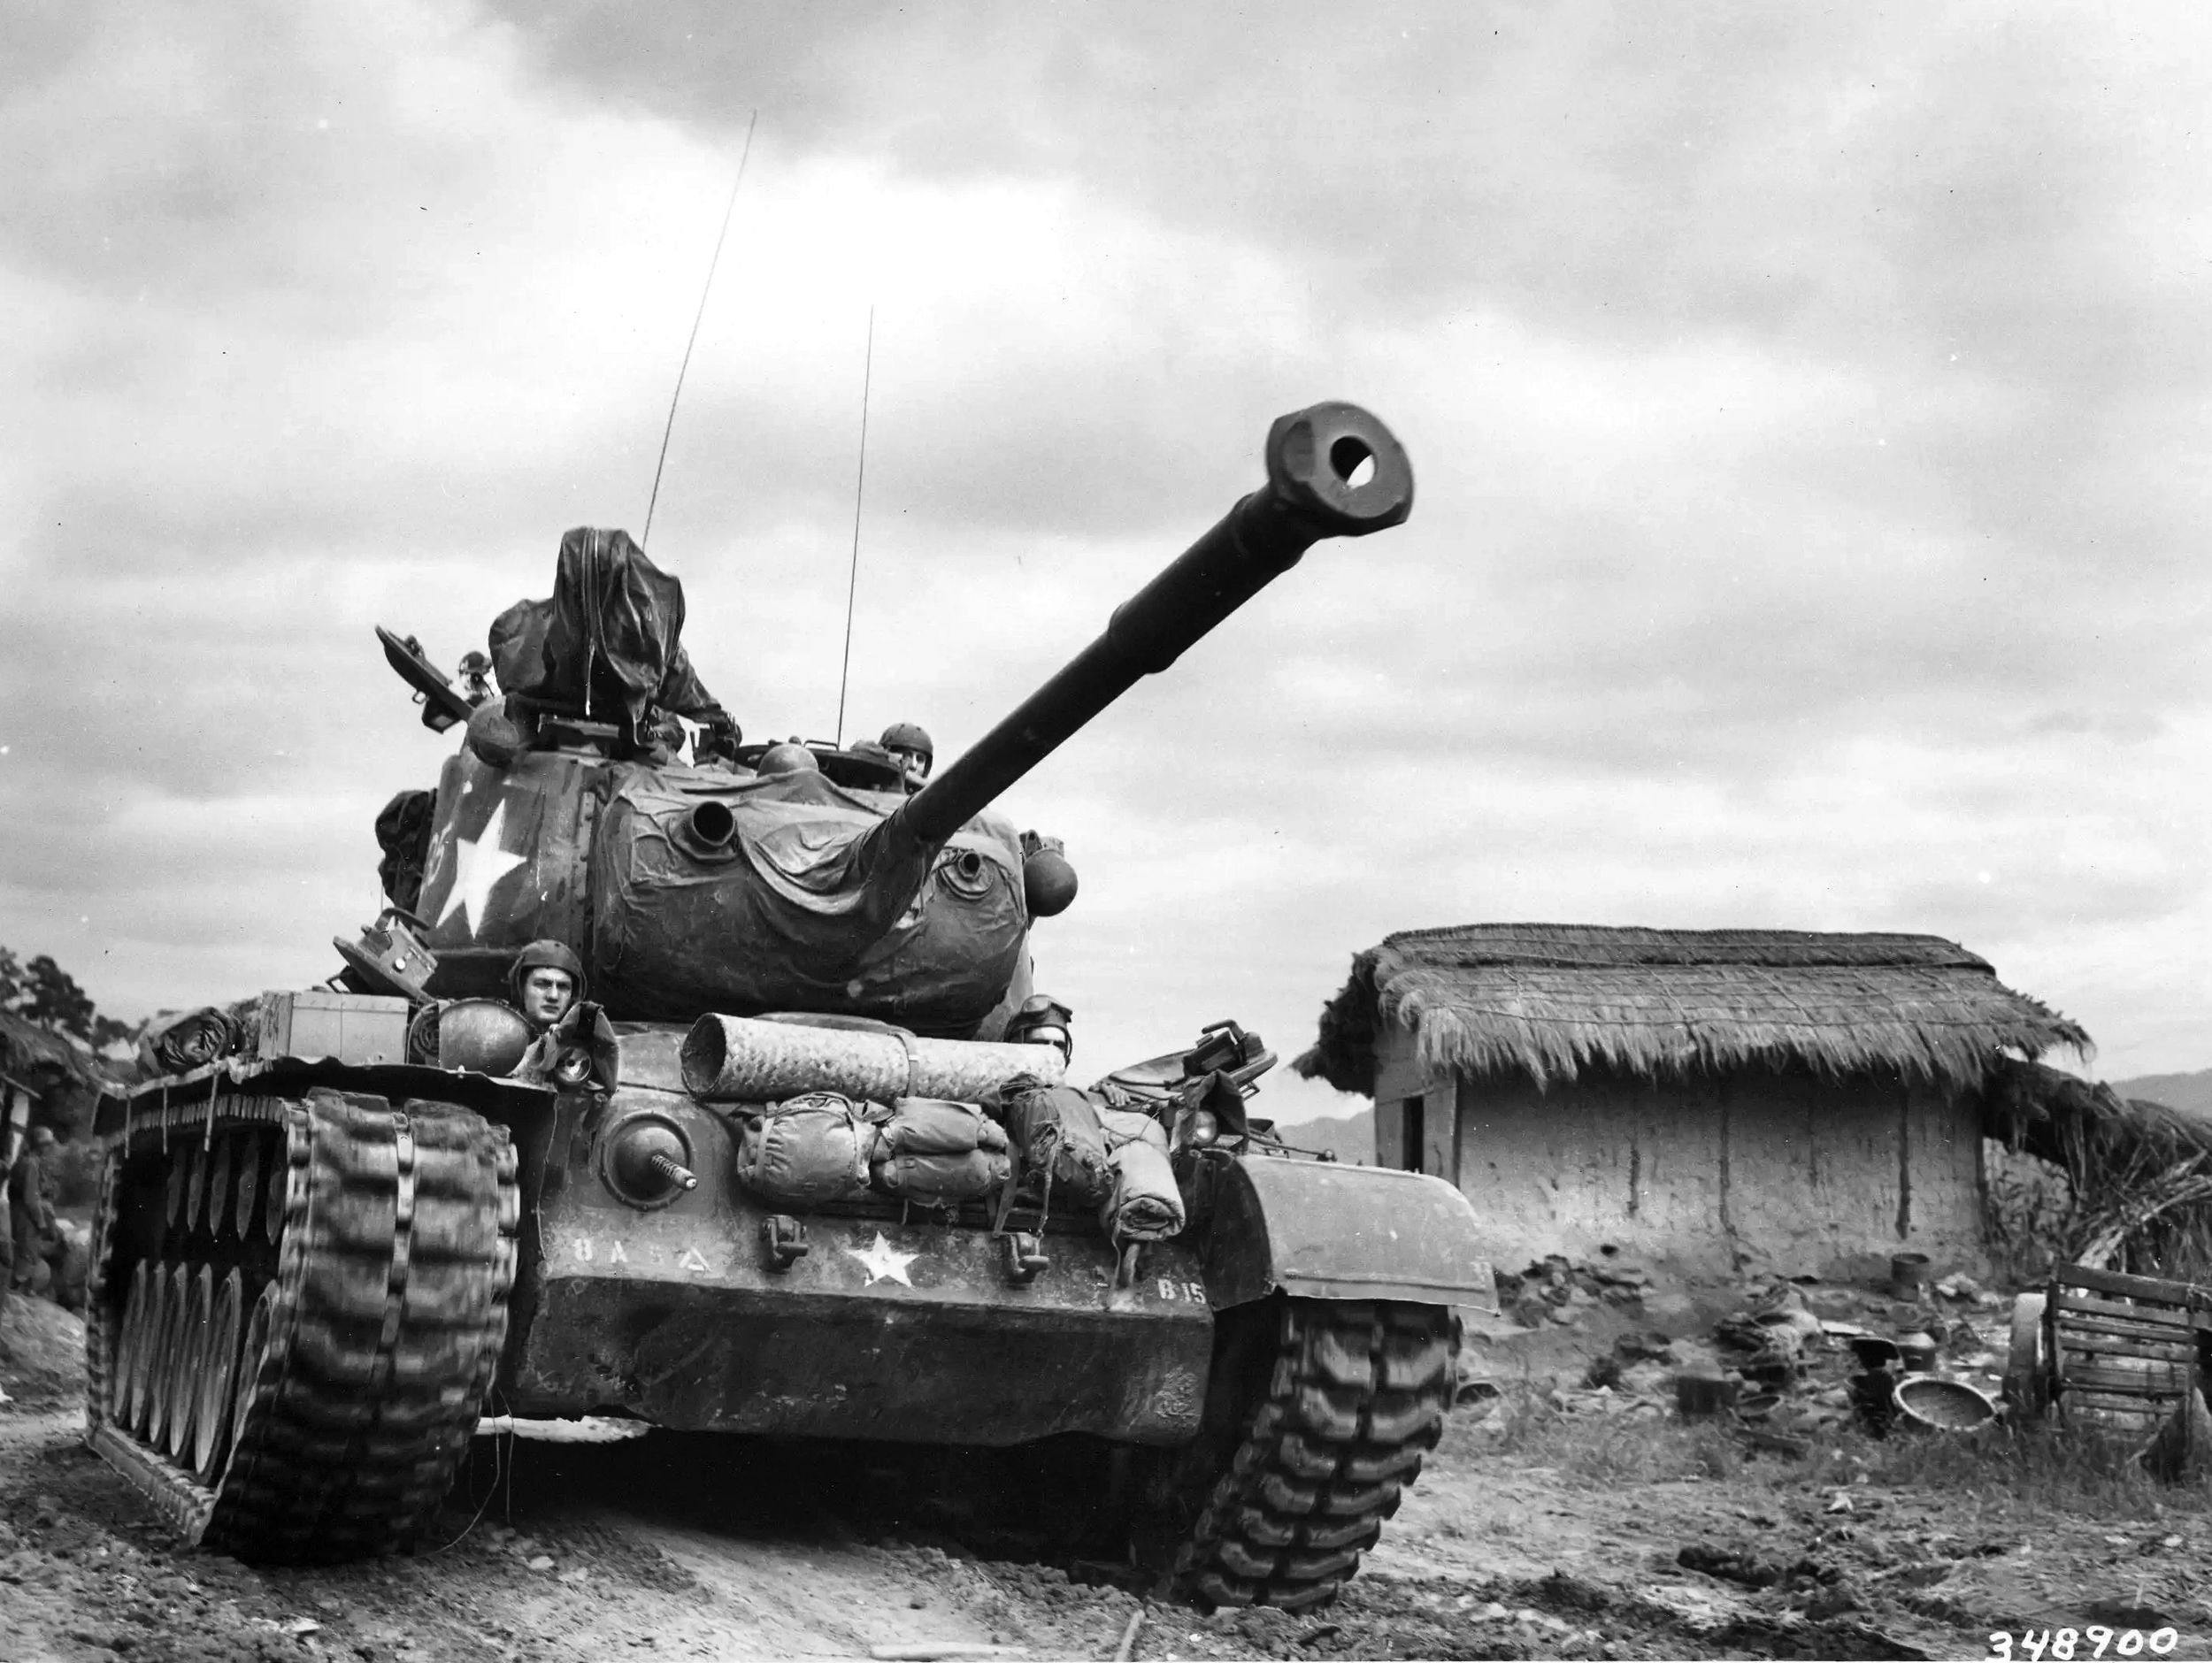 This  U.S. Army tank, identified as an M46 Patton, advances past the village of Kumko in September 1950. The M46 was an improved version of the M26 Pershing and began arriving in South Korea in August 1950.